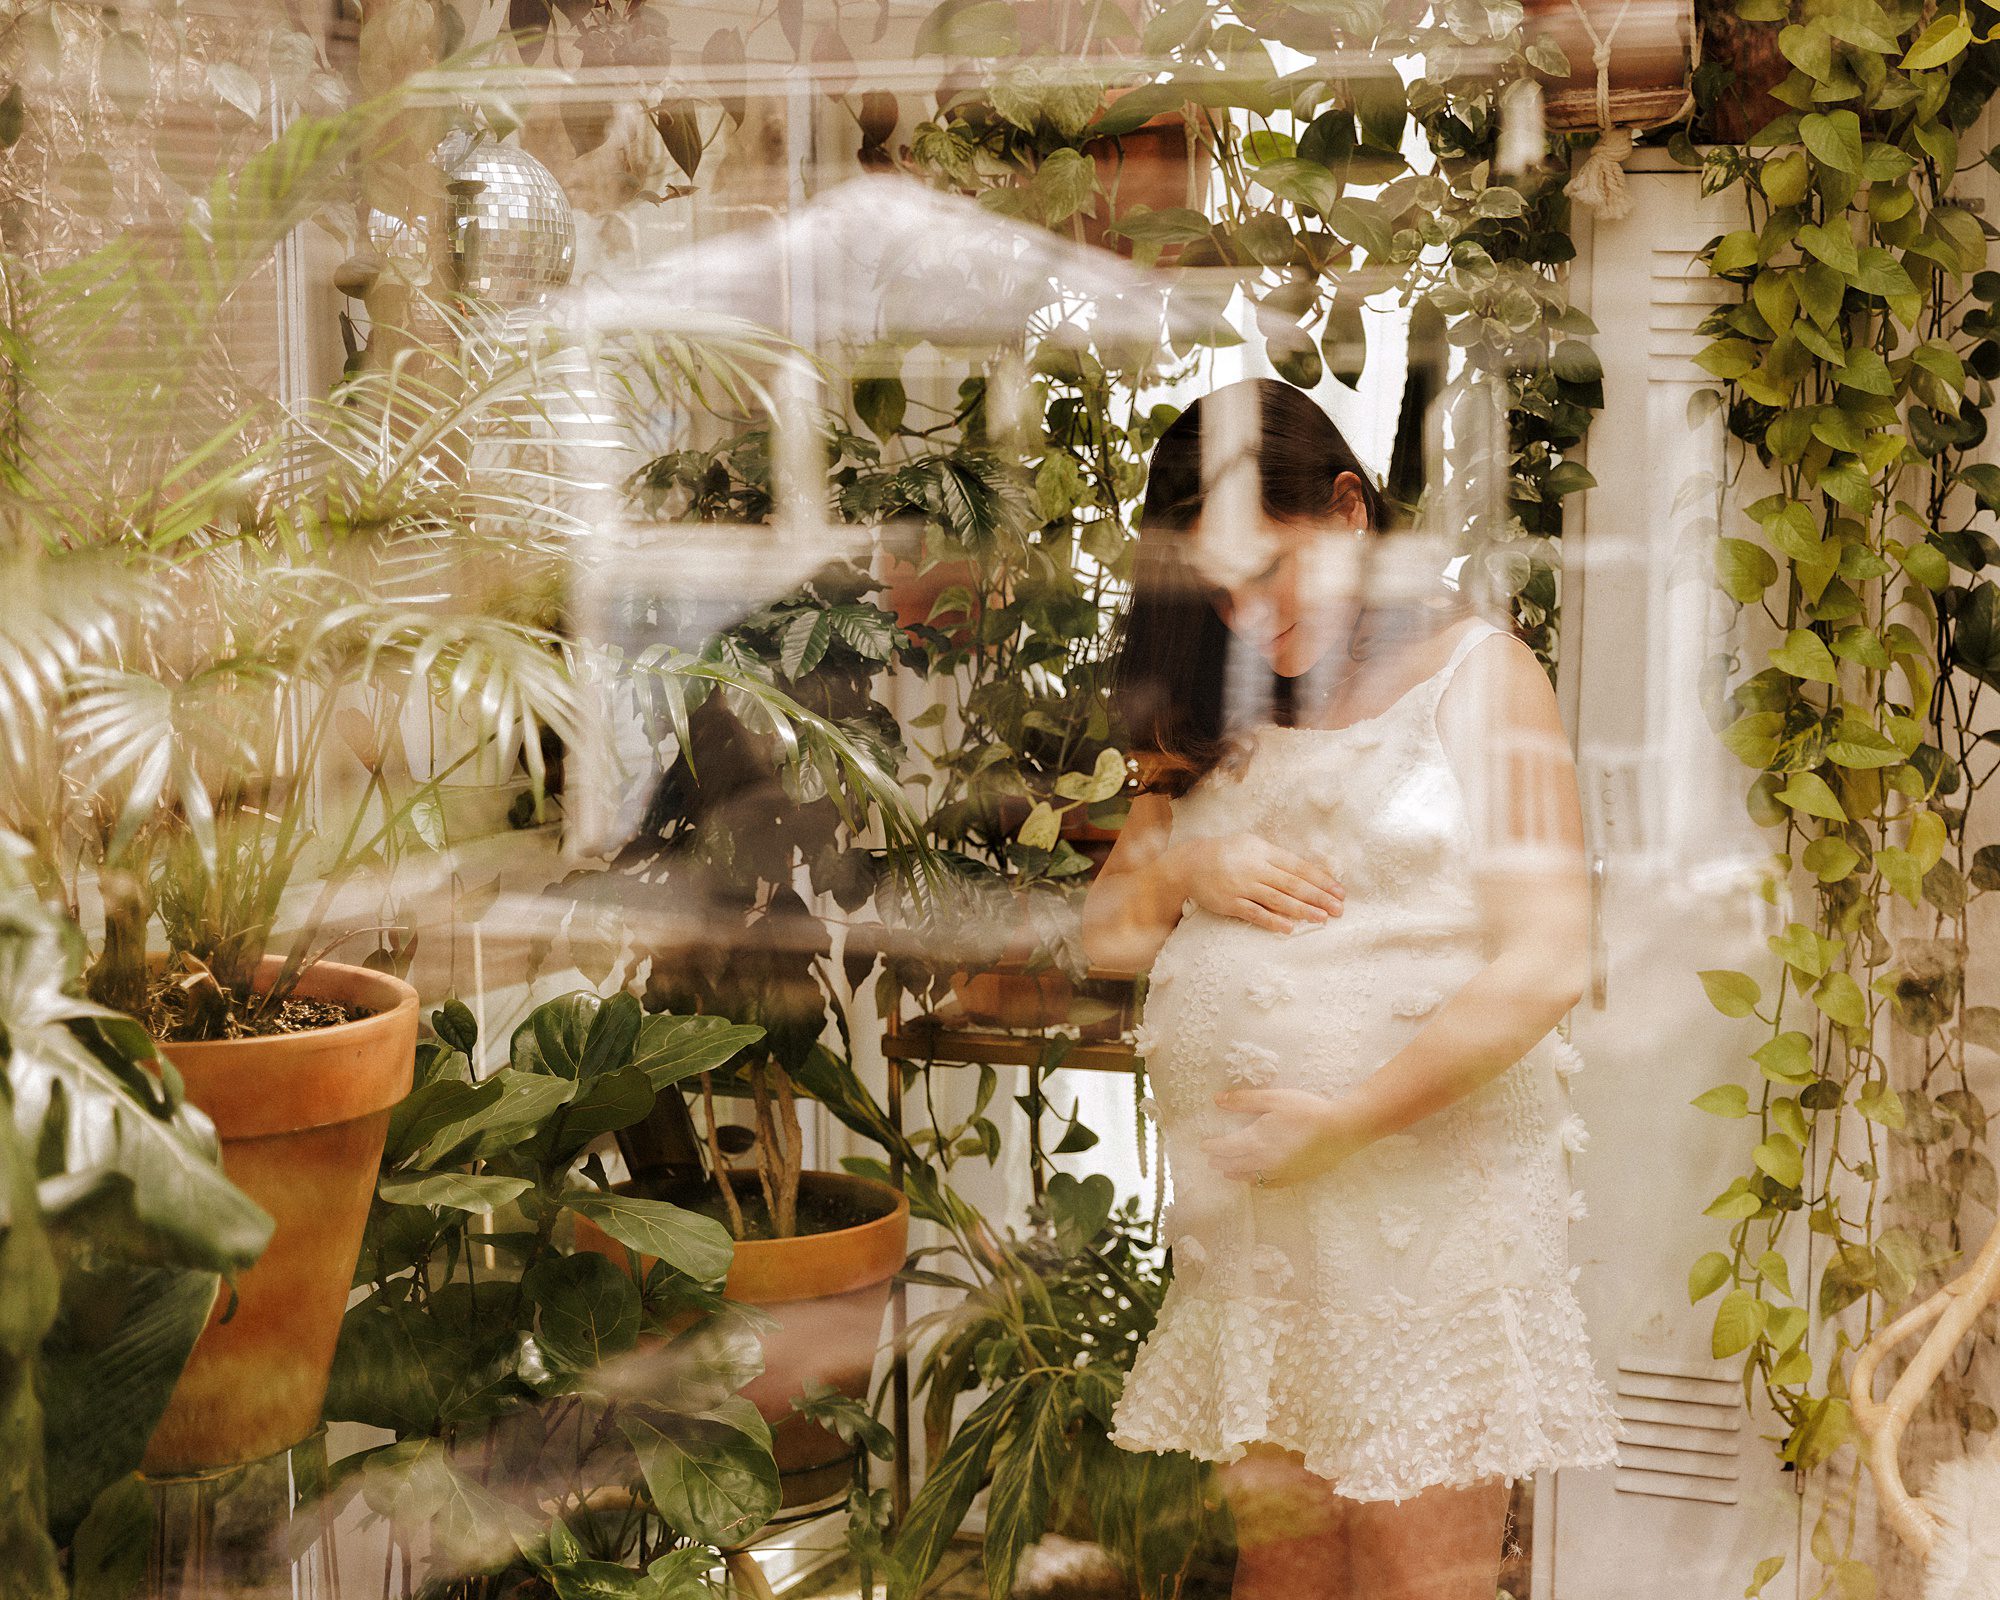 East Nashville Maternity Photography, Nashville Maternity Photographer Ashley Erin West photograph from a Greenhouse Mini Session in the East Nash Greenhouse. Maternity Mini Session , Nashville Maternity Photographer Ashley Erin West photograph from a Greenhouse Mini Session in the East Nash Greenhouse. Maternity Mini Session